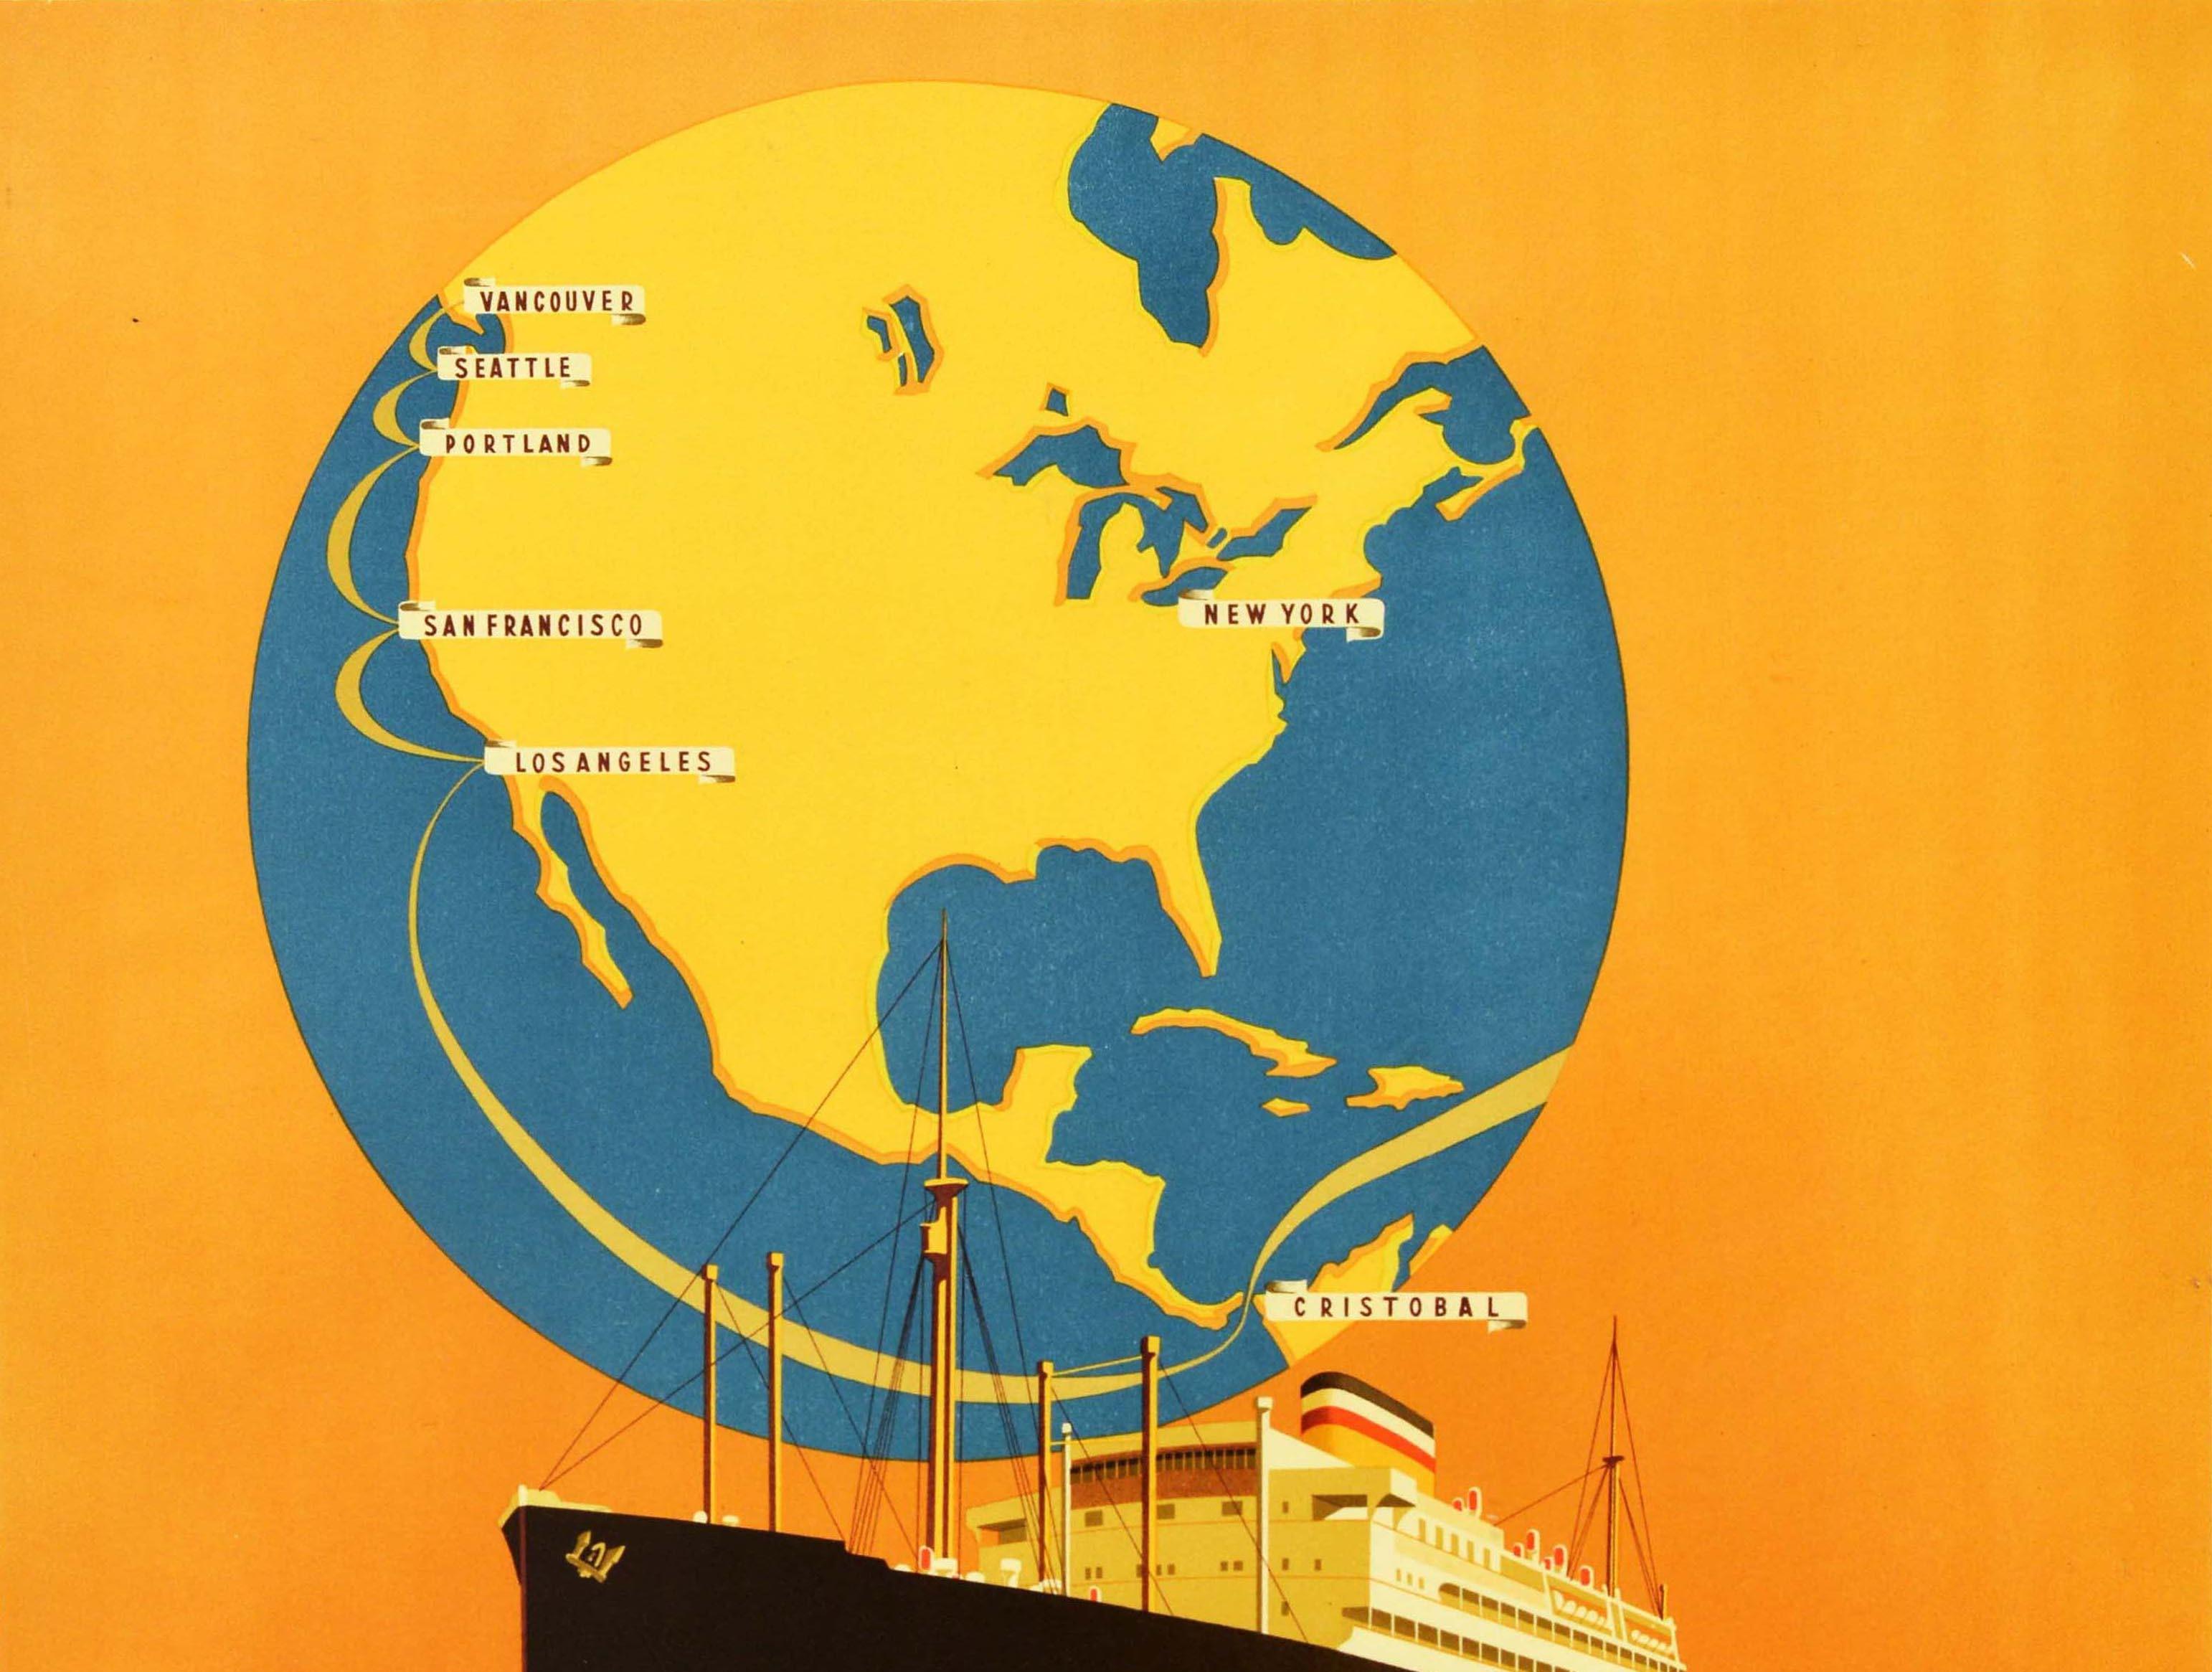 Original vintage travel poster advertising Hamburg America Line cruises direct to Los Angeles San Francisco featuring a sleek ocean liner ship sailing at sea in front of a globe of the world marked with New York and the city names on the route over